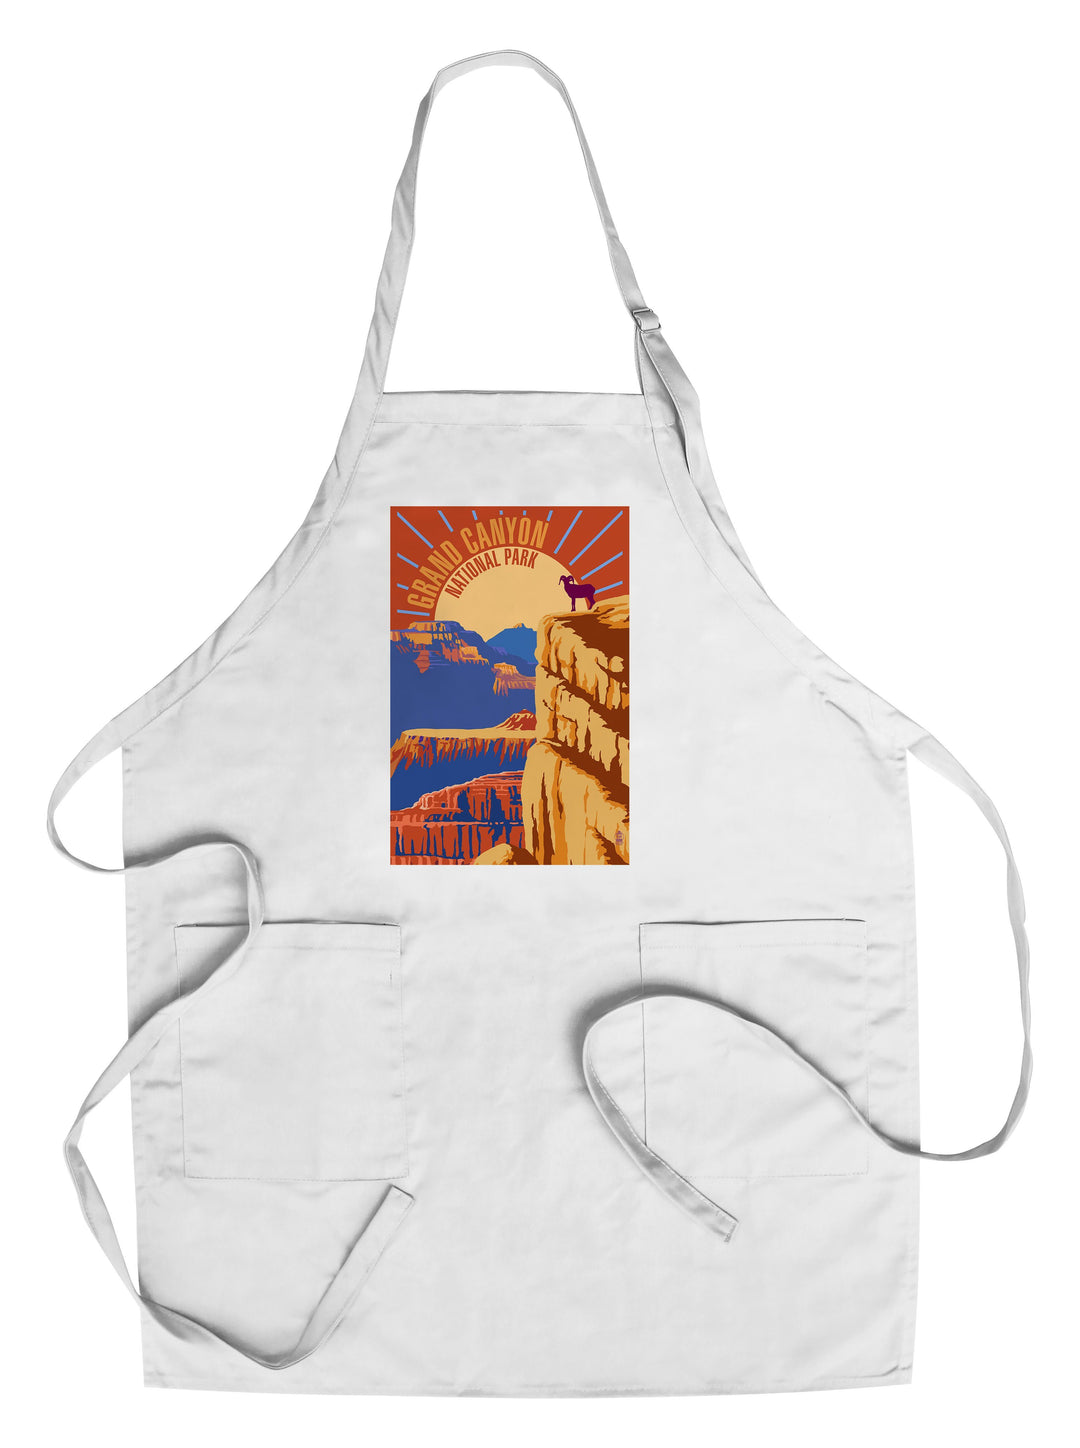 Grand Canyon National Park, Psychedelic, Lantern Press Poster, Towels and Aprons Kitchen Lantern Press Chef's Apron 